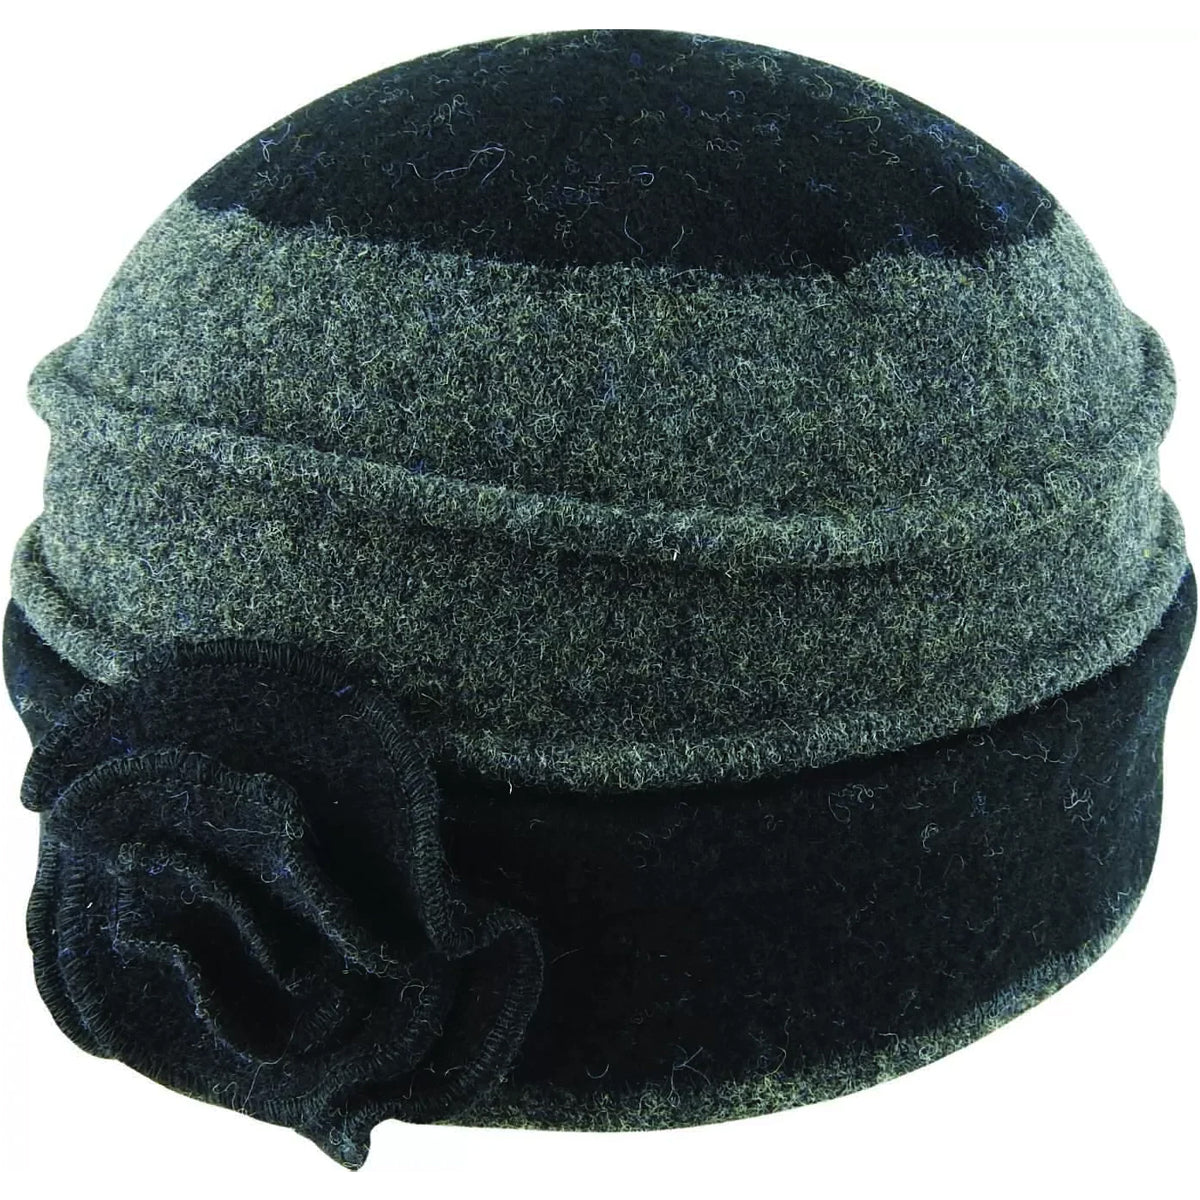 BOILED WOOL 2 TONED FLOWER PULL ON HAT